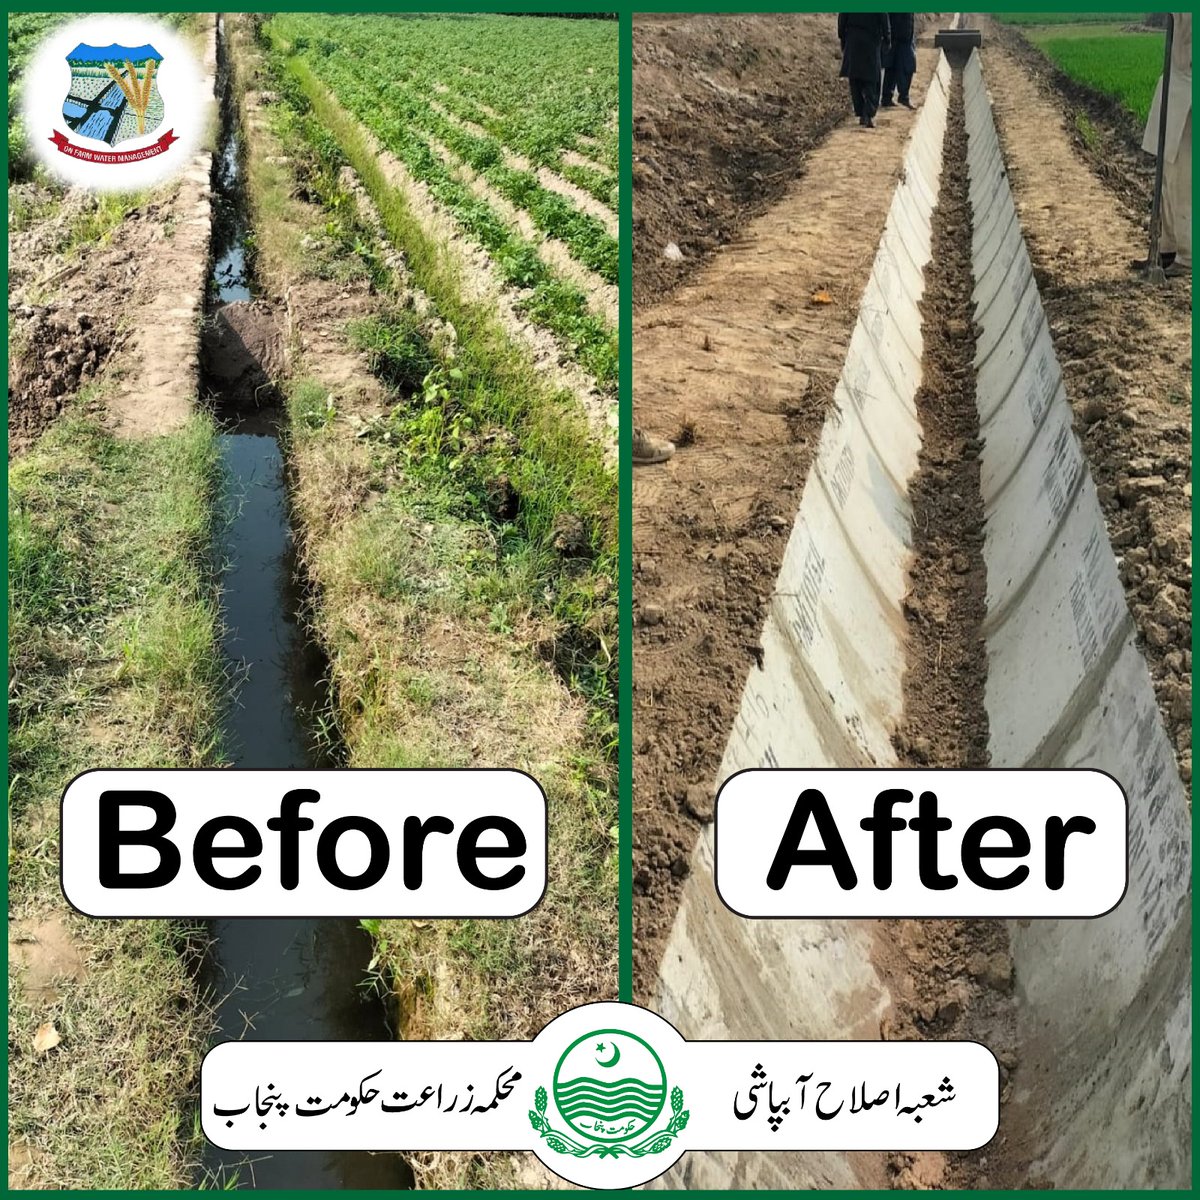 Watercourse lining in #Pakpattan by #OFWM #WaterManagement wing of #Agriculture #Department #Punjab 
#MoreCropPerDrop 
#کم_پانی_بہتر_کاشتکاری